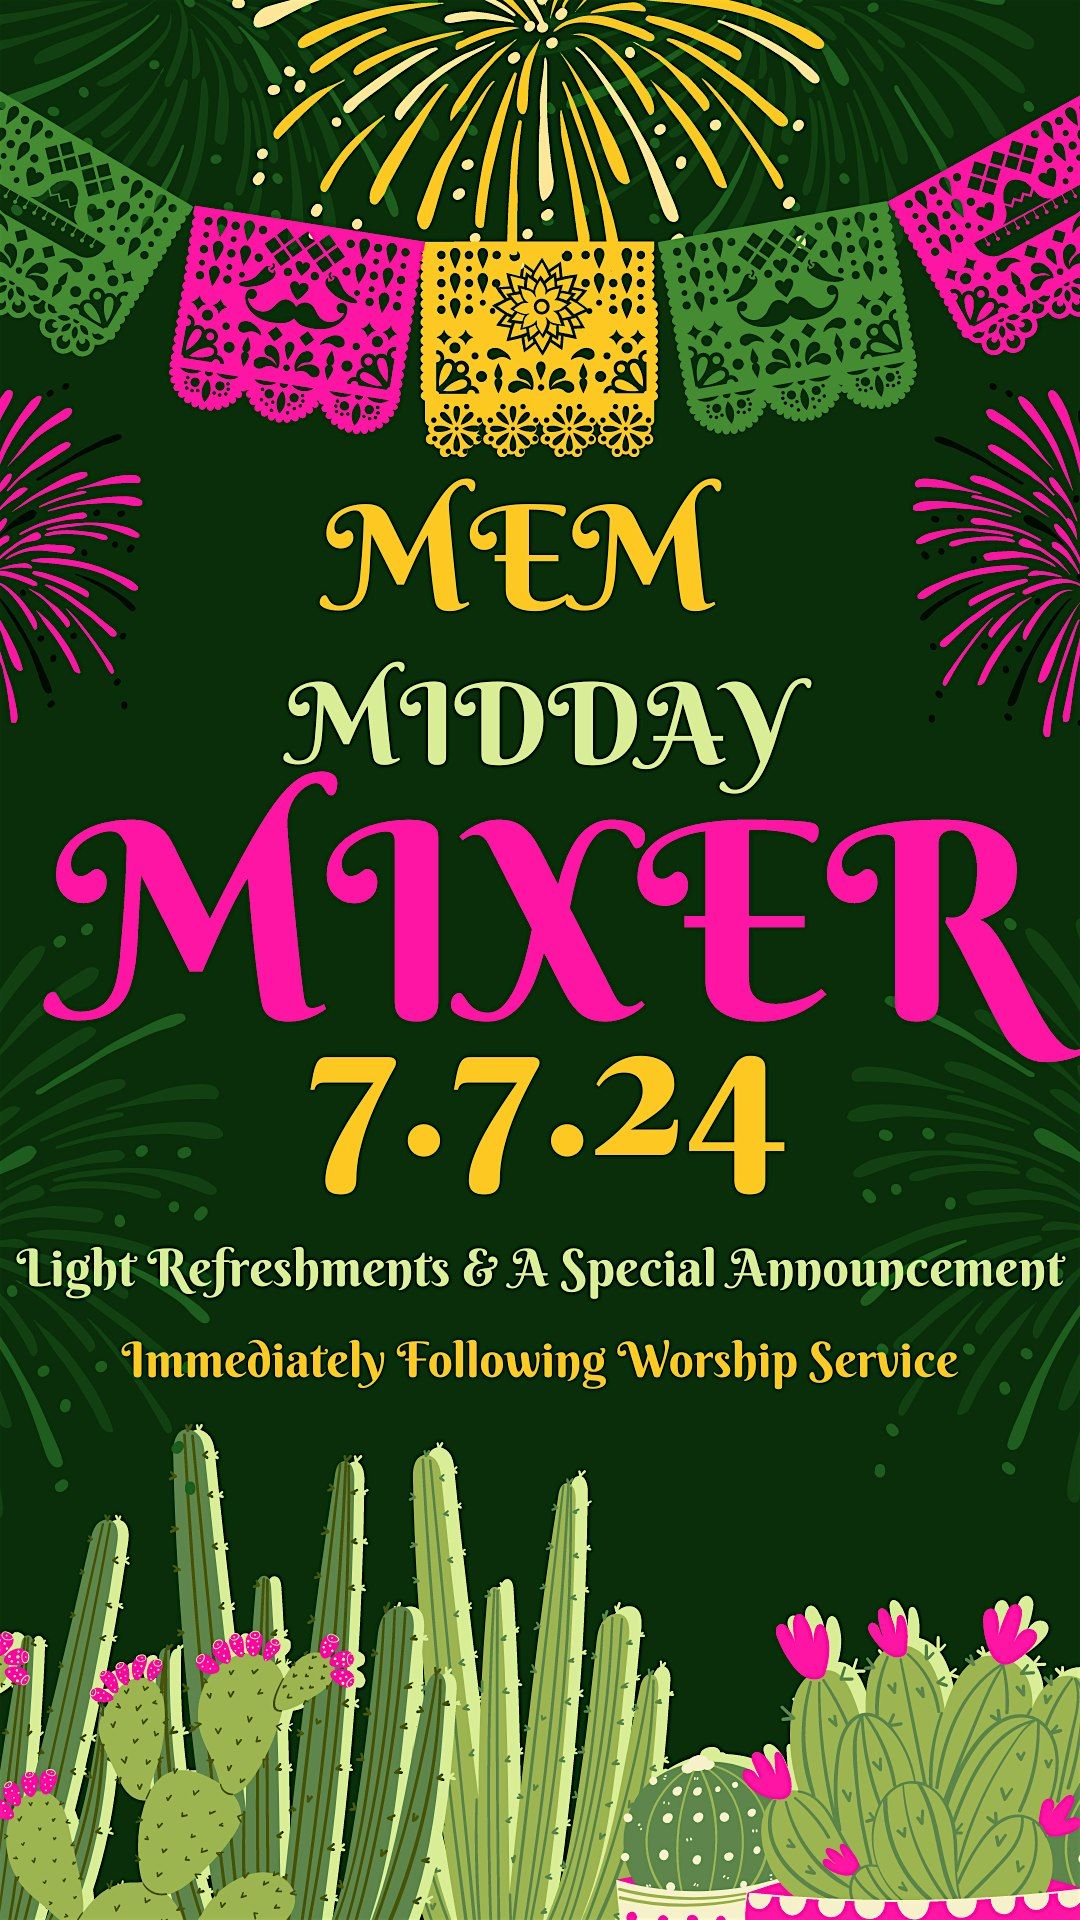 MIDDAY MARRIAGE MIXER - FREE!!!